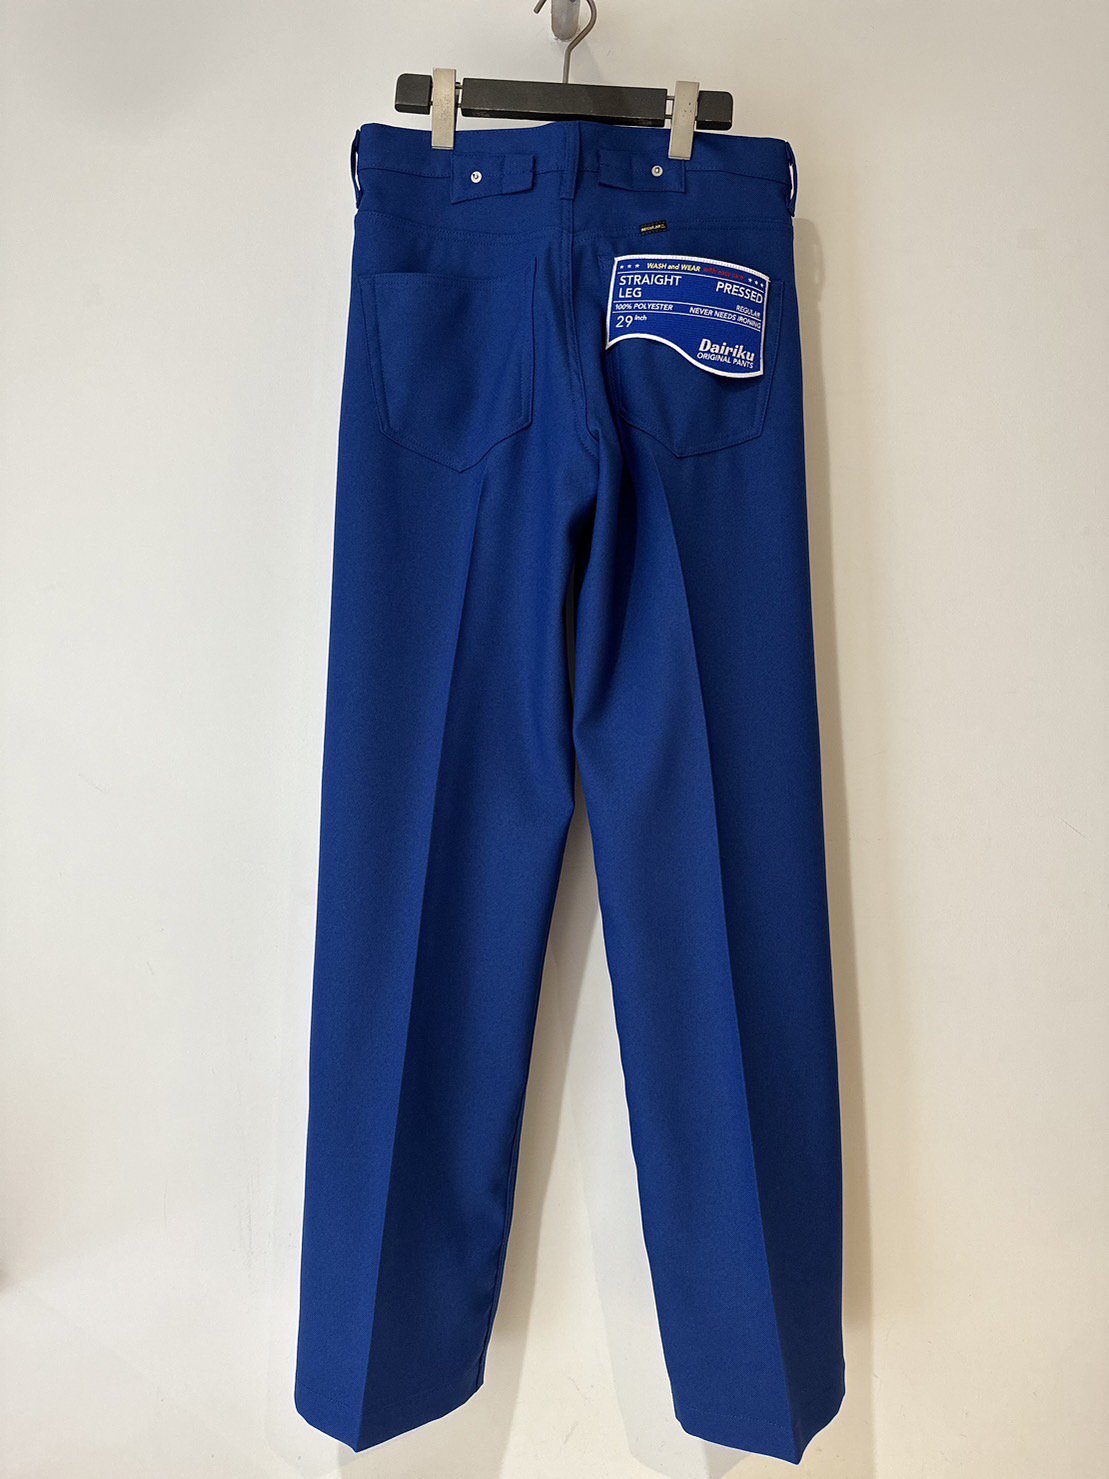 DAIRIKU<br />Straight Pressed Pants / Royal Blue<img class='new_mark_img2' src='https://img.shop-pro.jp/img/new/icons14.gif' style='border:none;display:inline;margin:0px;padding:0px;width:auto;' />